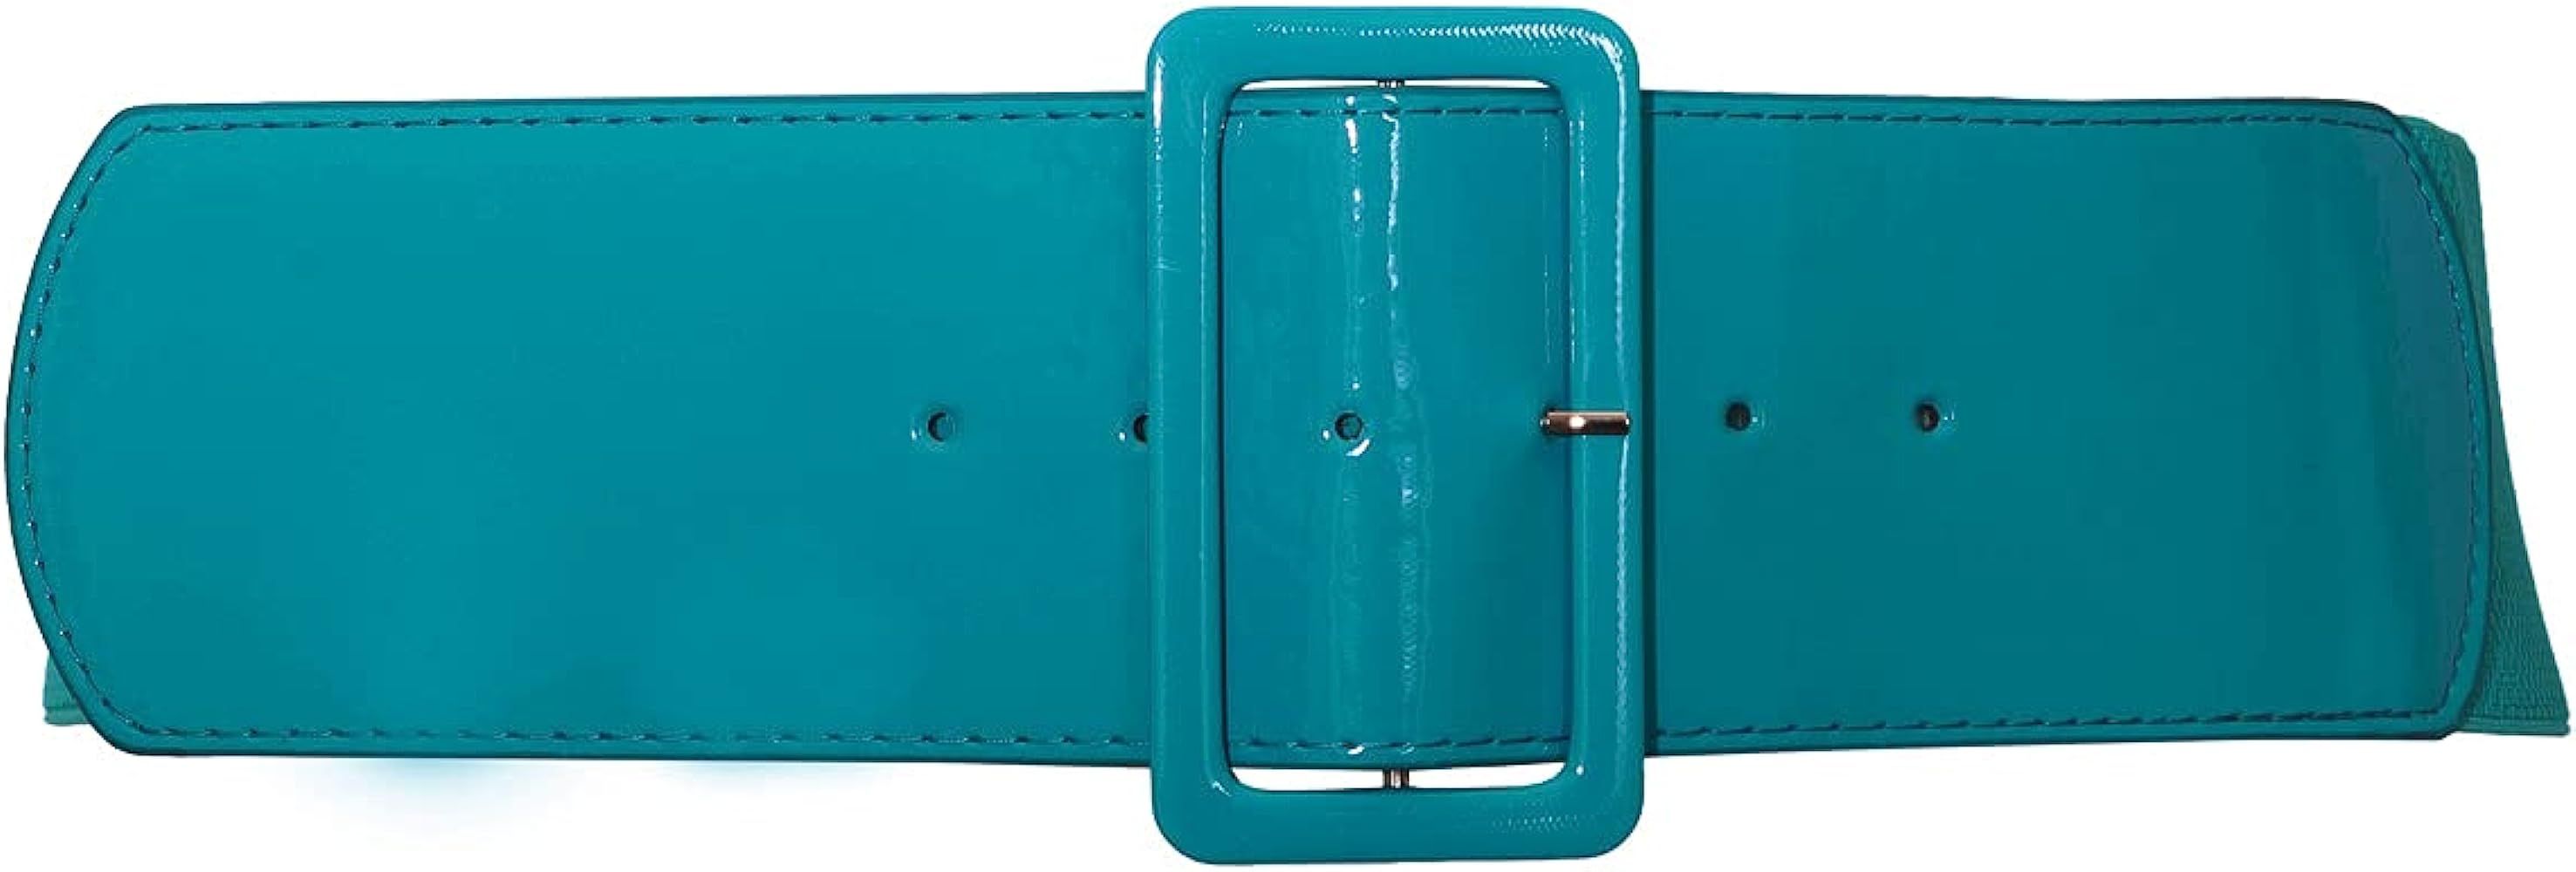 eVogues Plus Size Wide Patent Leather Fashion Belt Teal - One Size Plus at Amazon Women’s Cloth... | Amazon (US)